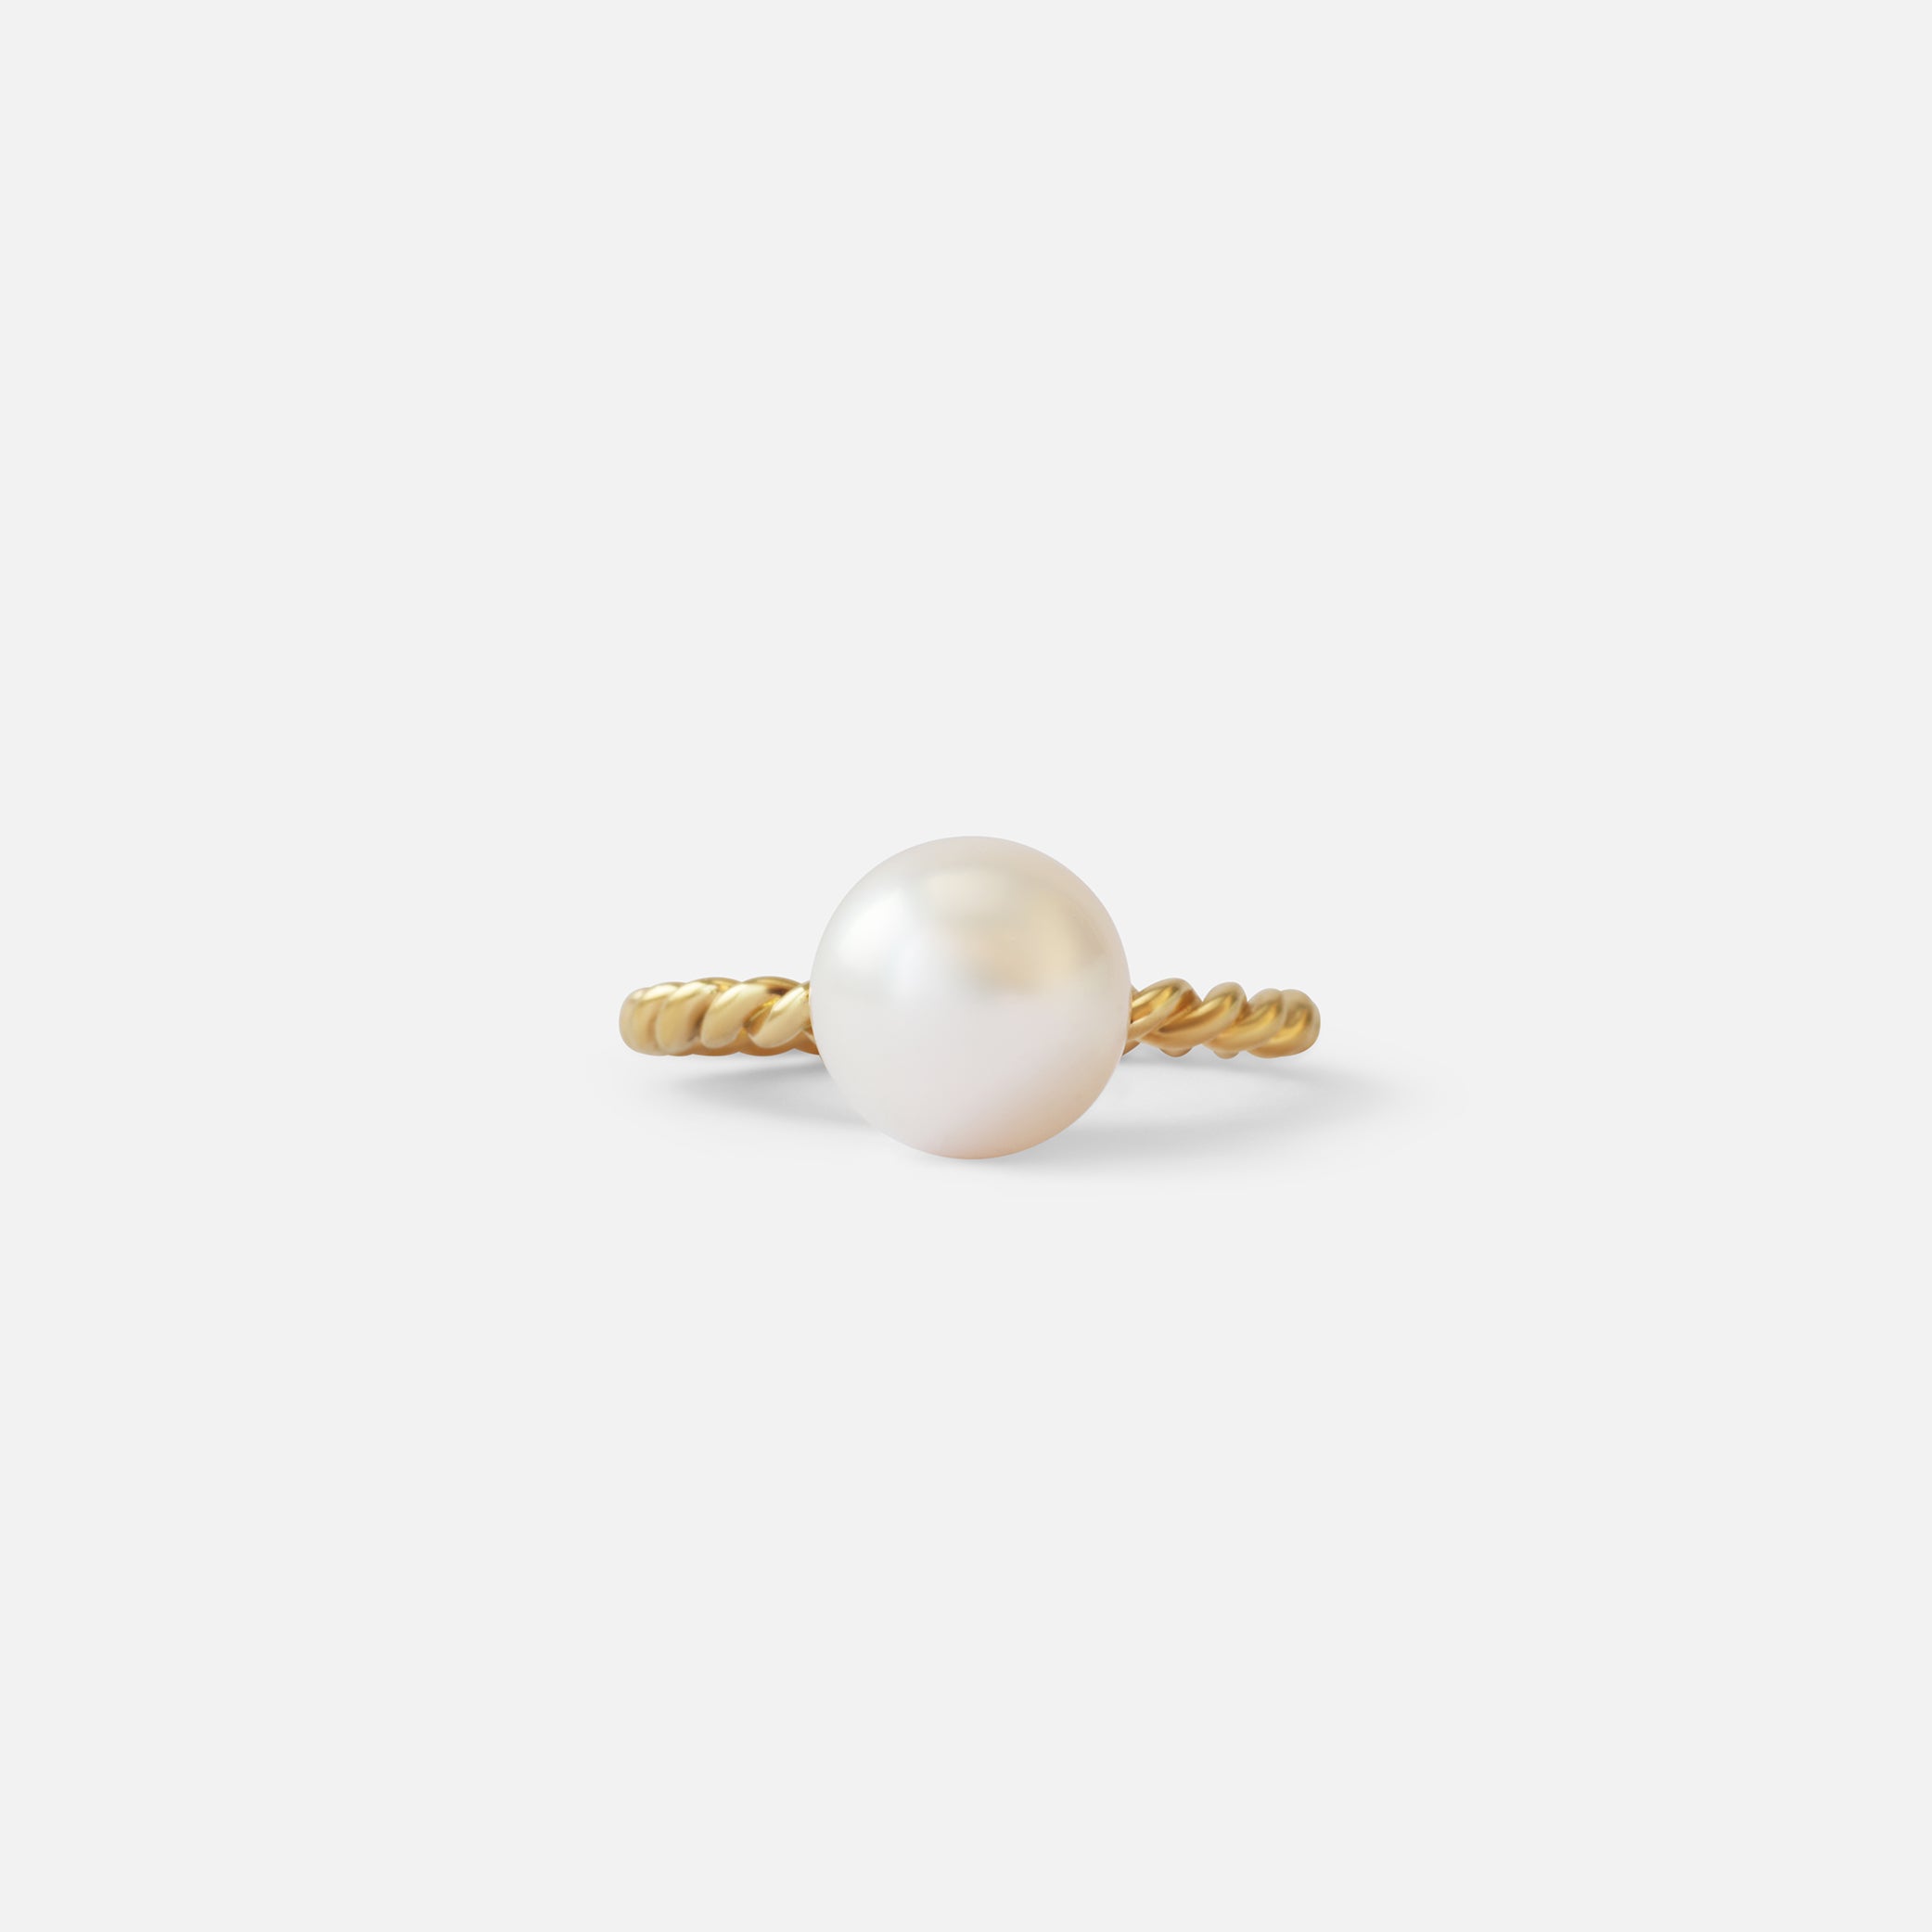 Twisted Band Akoya Pearl Ring By Bree Altman